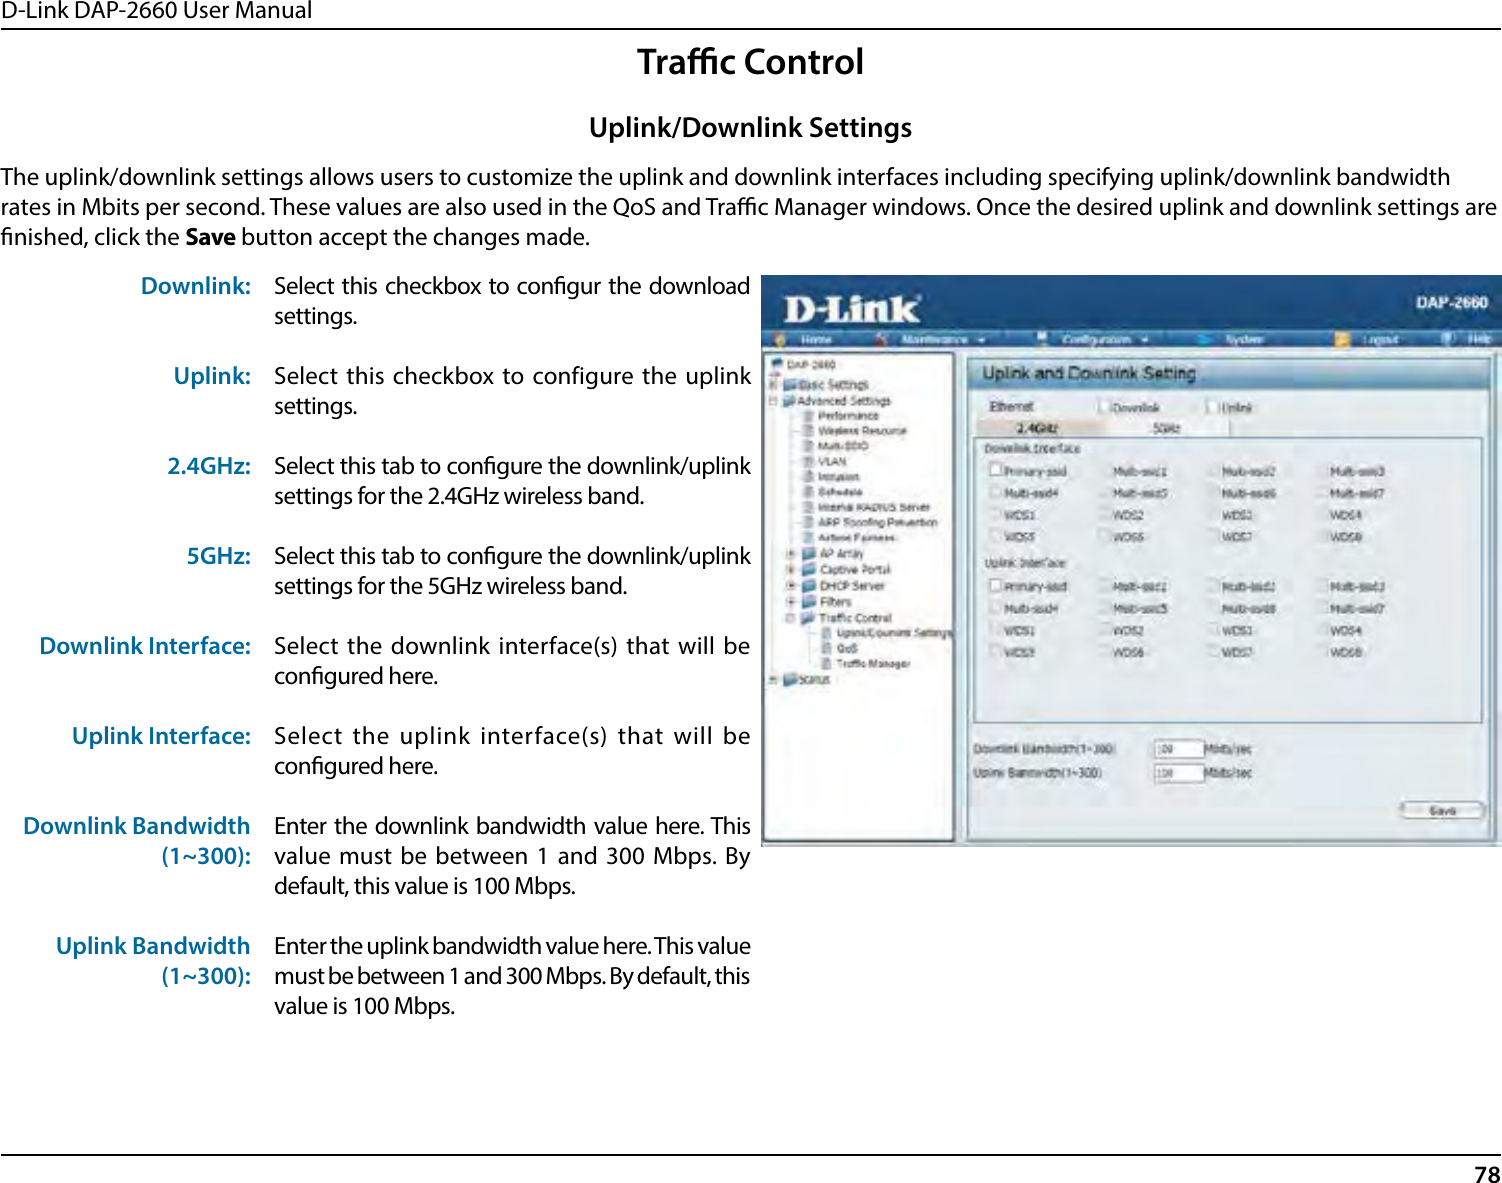 D-Link DAP-2660 User Manual78Trac ControlThe uplink/downlink settings allows users to customize the uplink and downlink interfaces including specifying uplink/downlink bandwidth rates in Mbits per second. These values are also used in the QoS and Trac Manager windows. Once the desired uplink and downlink settings are nished, click the Save button accept the changes made.Downlink:Uplink:2.4GHz:5GHz:Downlink Interface:Uplink Interface:Downlink Bandwidth (1~300):Uplink Bandwidth (1~300):Select this checkbox to congur the download settings.Select this checkbox to configure the uplink settings.Select this tab to congure the downlink/uplink settings for the 2.4GHz wireless band.Select this tab to congure the downlink/uplink settings for the 5GHz wireless band.Select the downlink interface(s) that will be congured here.Select the uplink interface(s) that will be congured here.Enter the downlink bandwidth value here. This value must be between 1 and 300 Mbps. By default, this value is 100 Mbps.Enter the uplink bandwidth value here. This value must be between 1 and 300 Mbps. By default, this value is 100 Mbps.Uplink/Downlink Settings